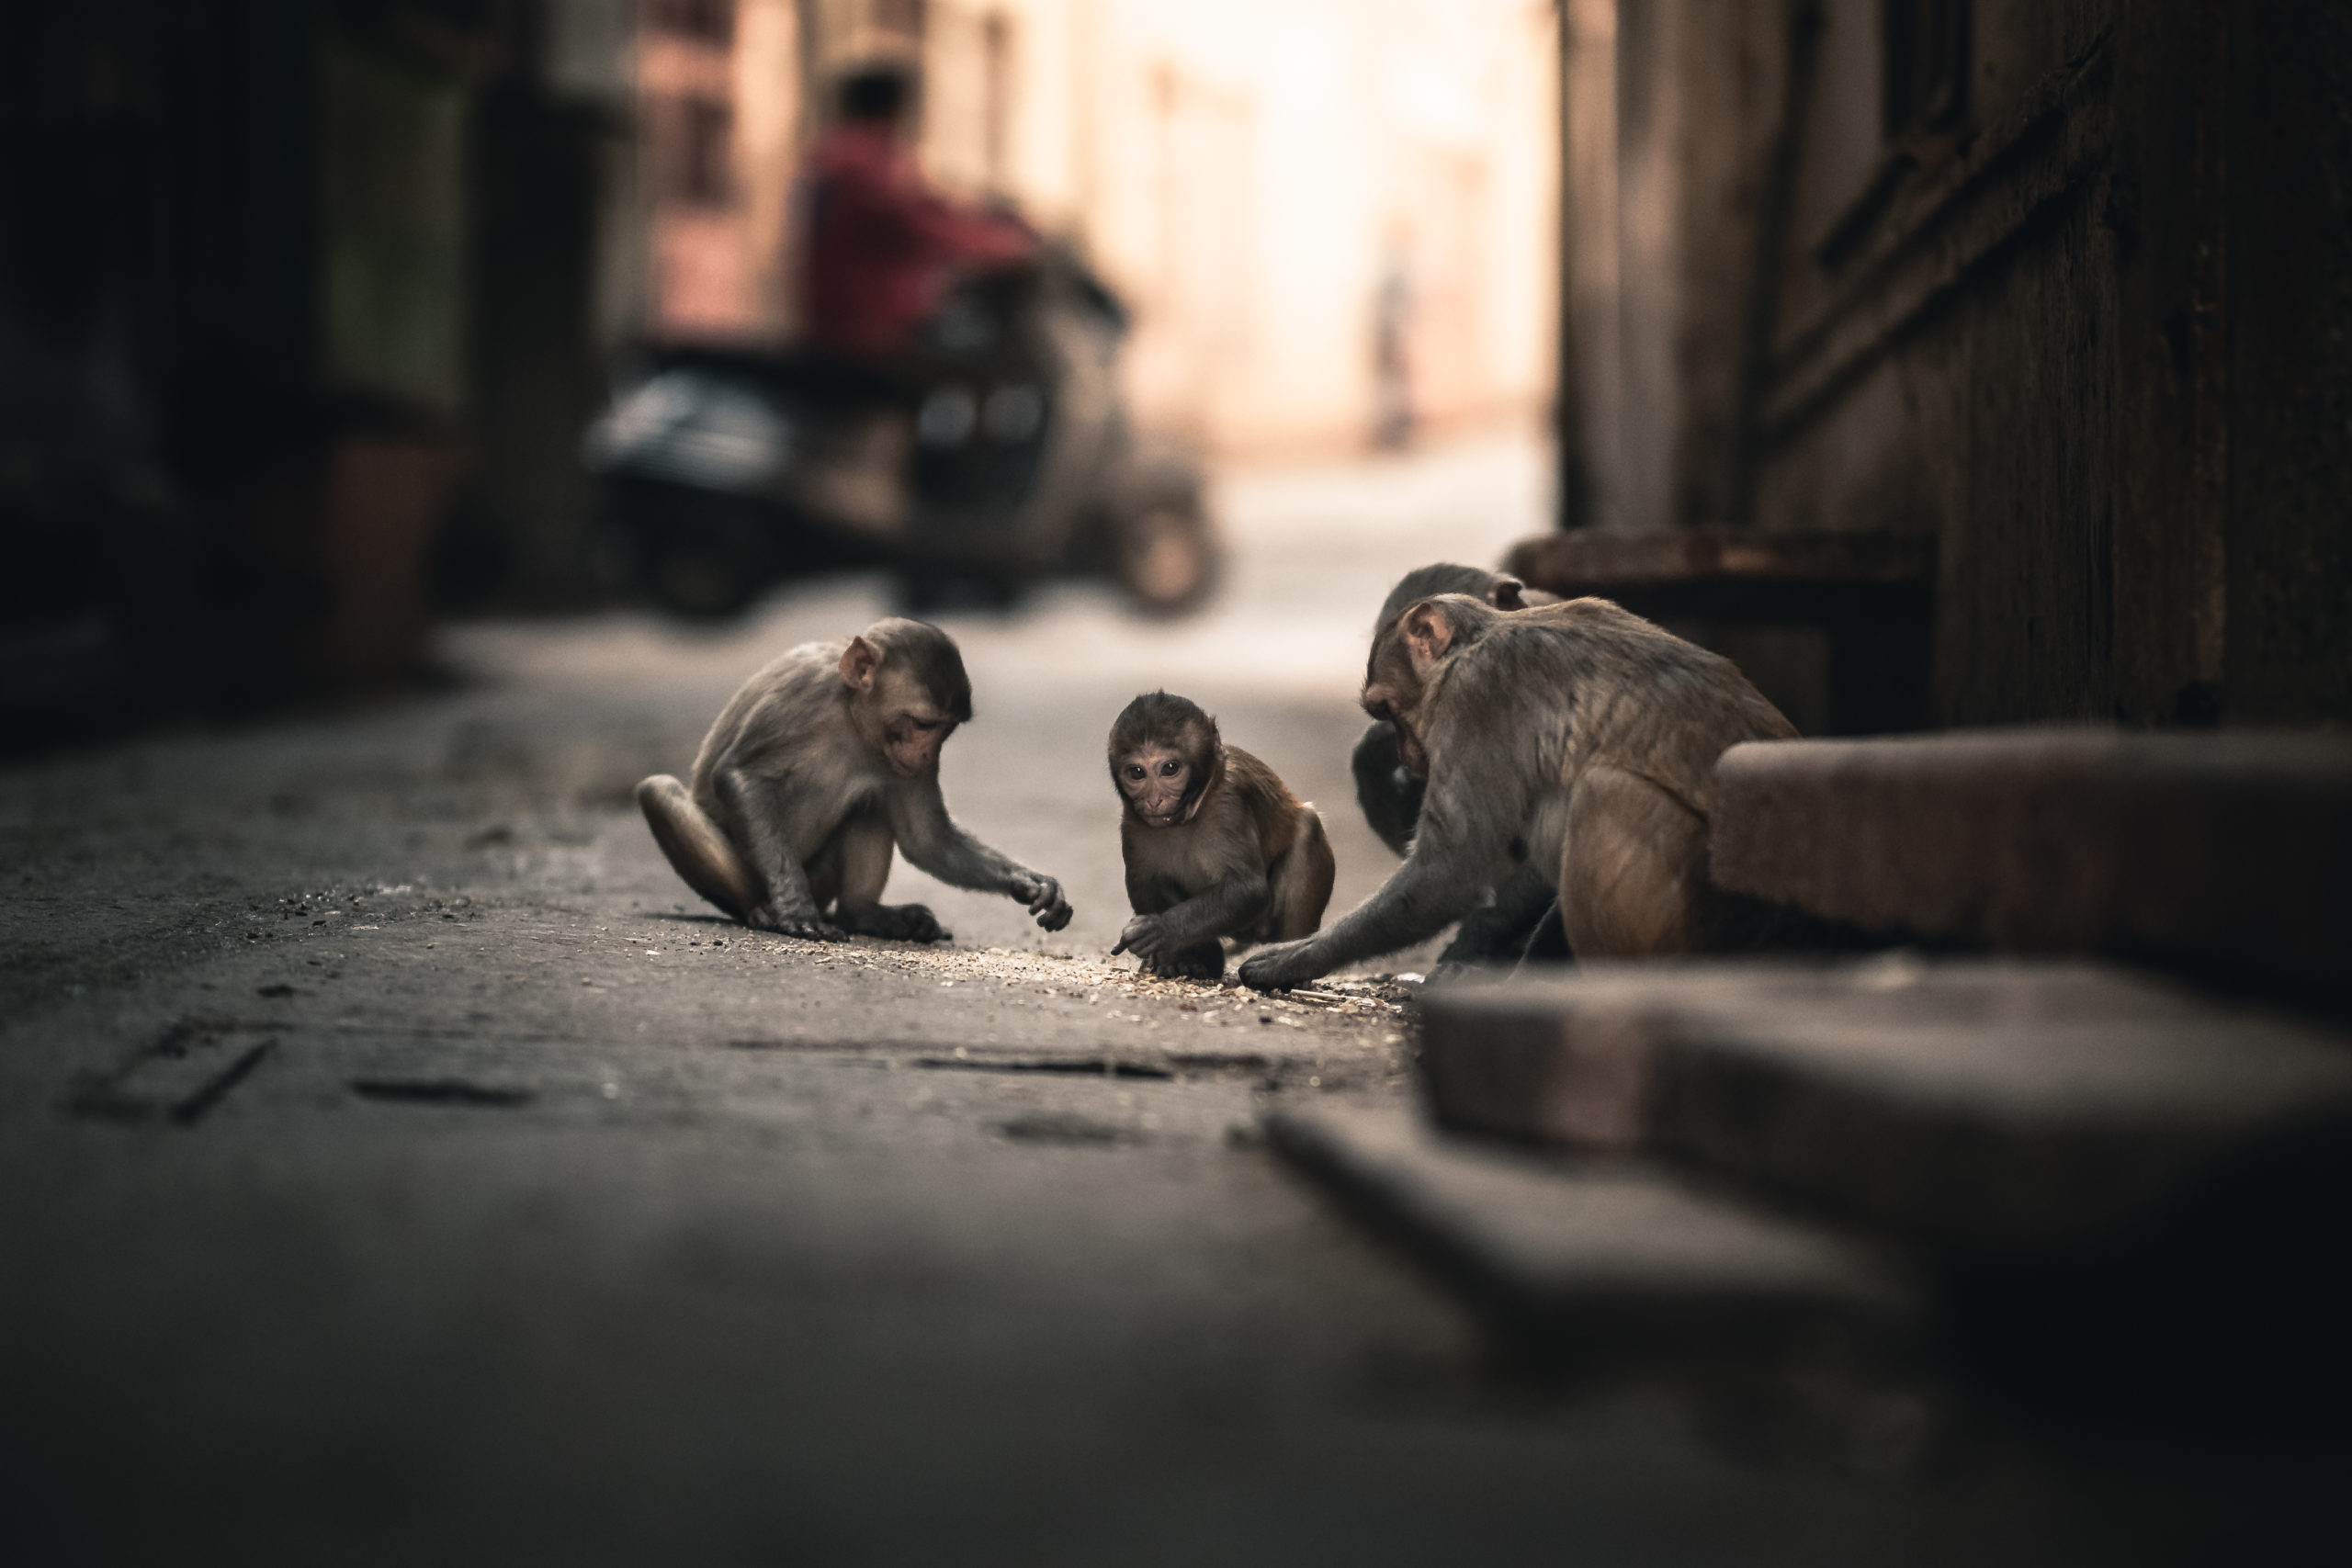 Street photography of monkeys on the streets of Mathura, India eating food off the ground